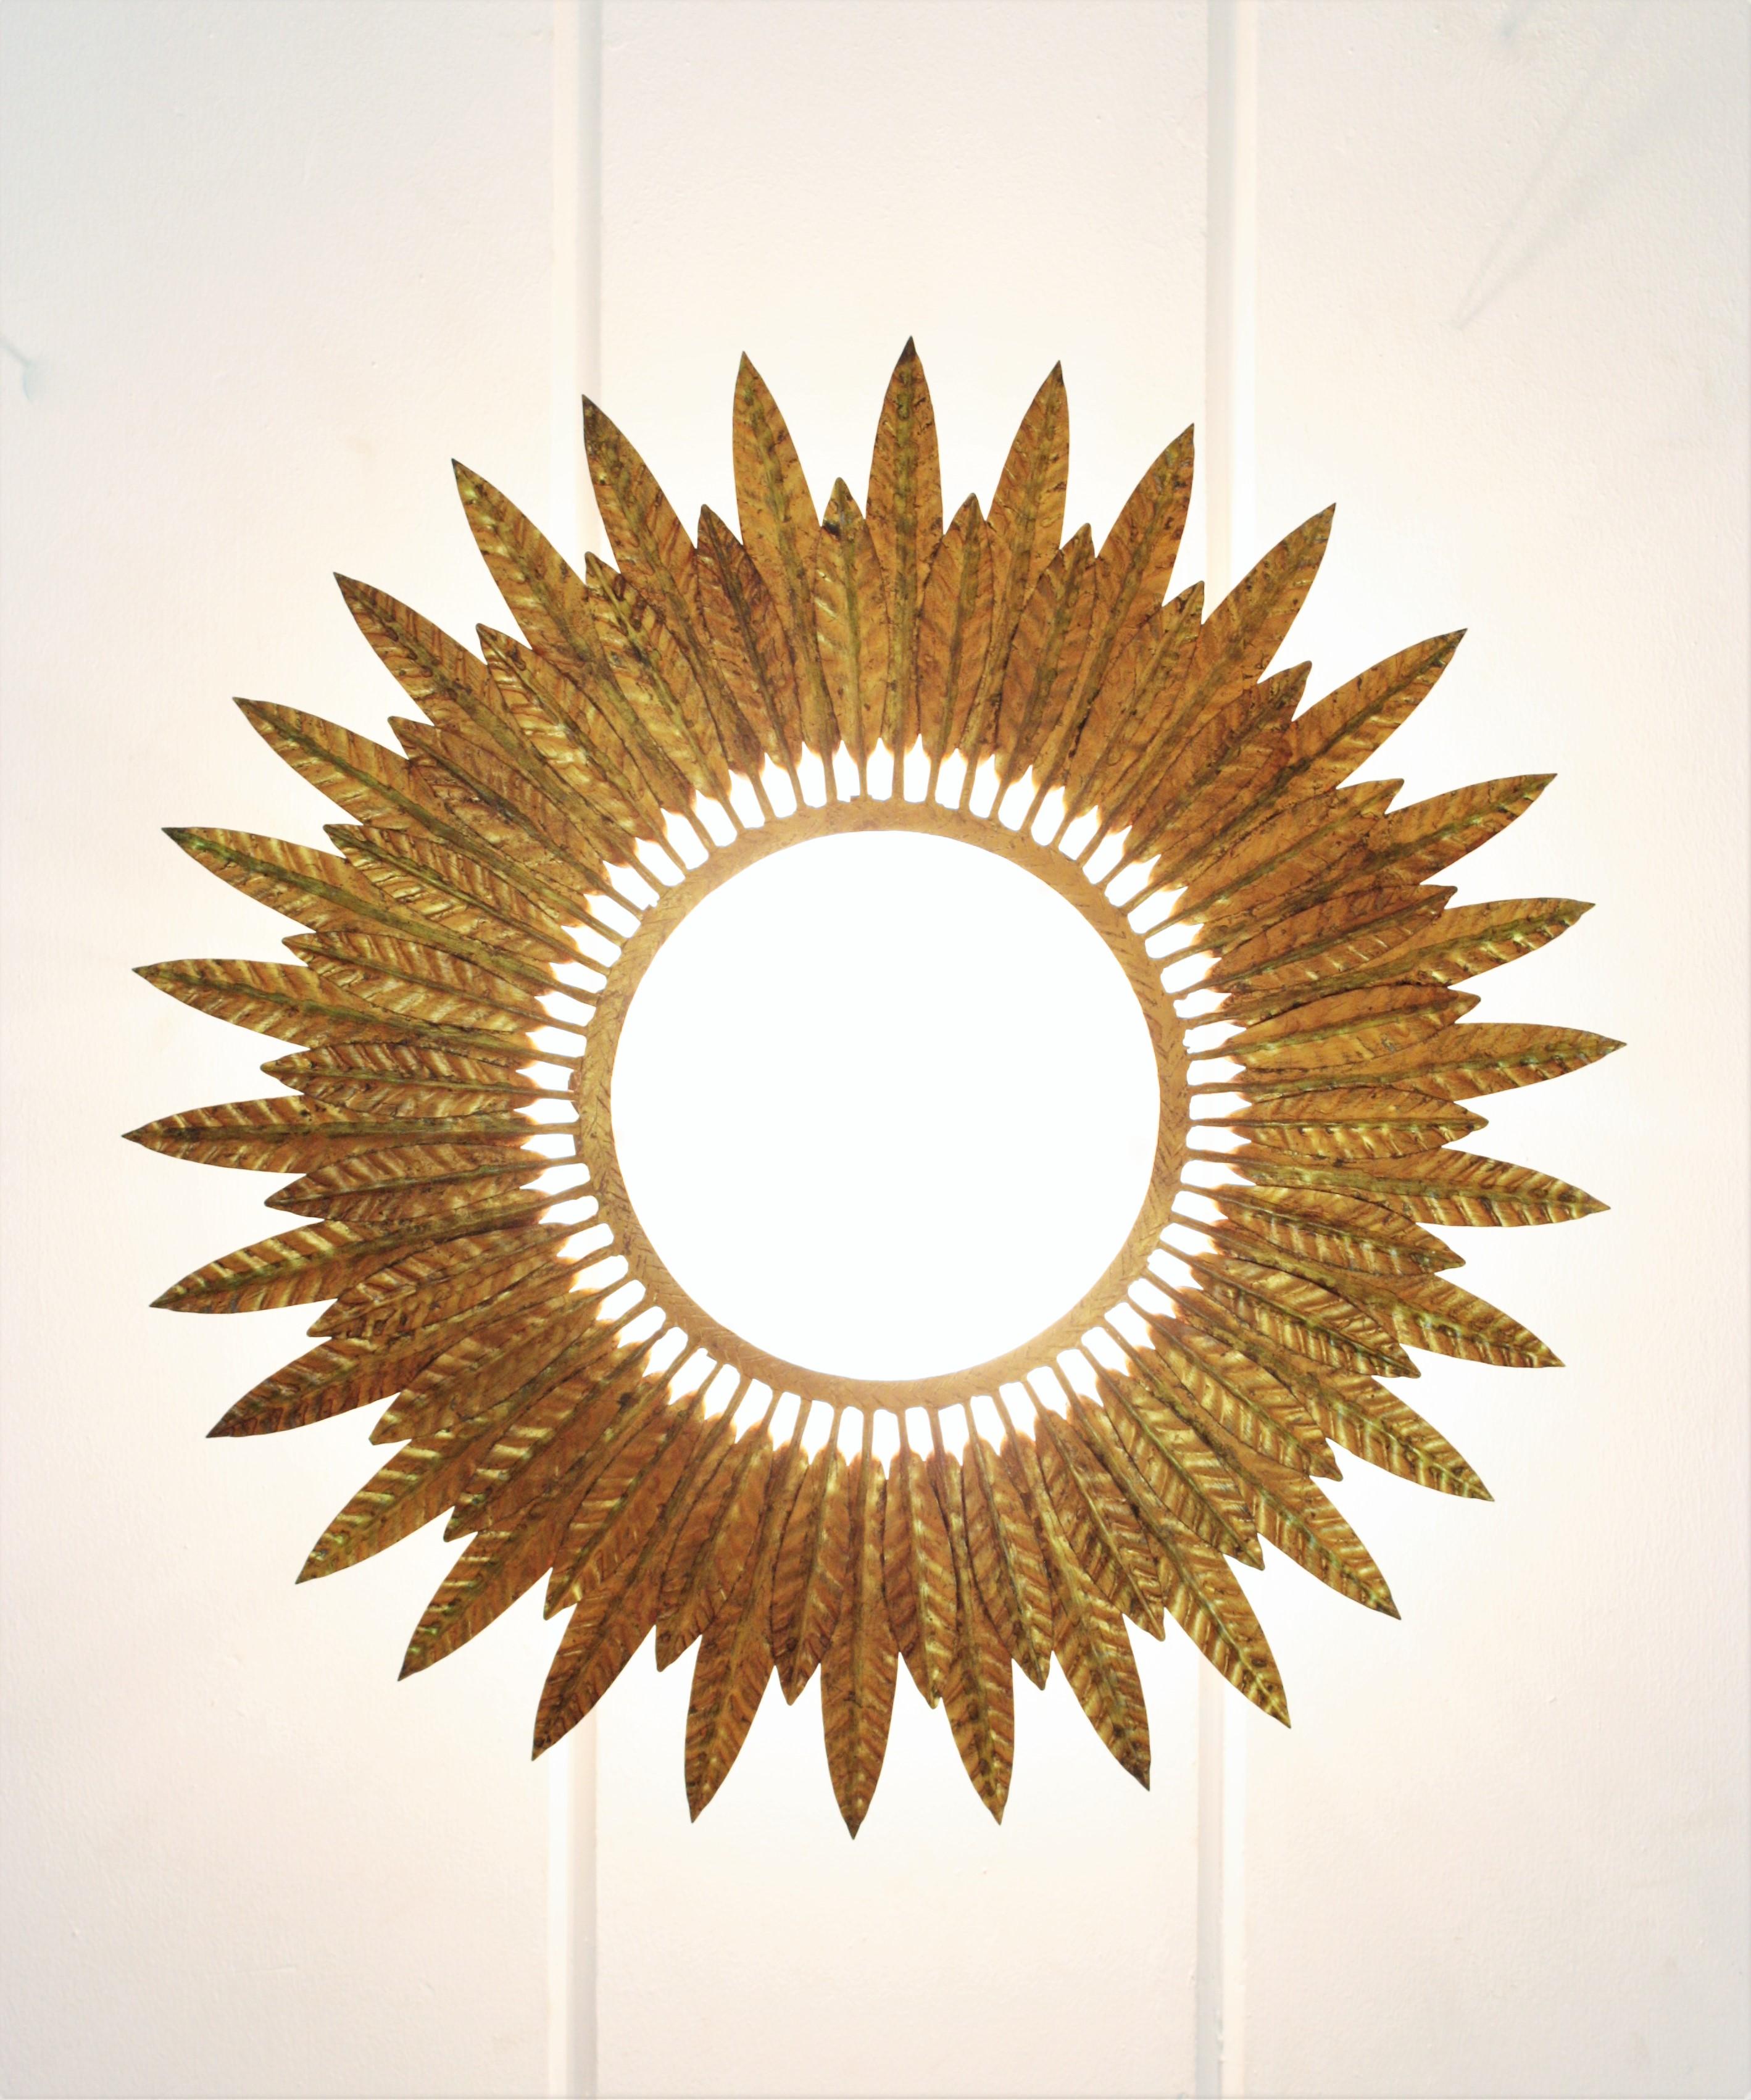 Gilt Iron Sunburst Leafed Light Fixture with Frosted Glass, Spain, 1950s For Sale 1